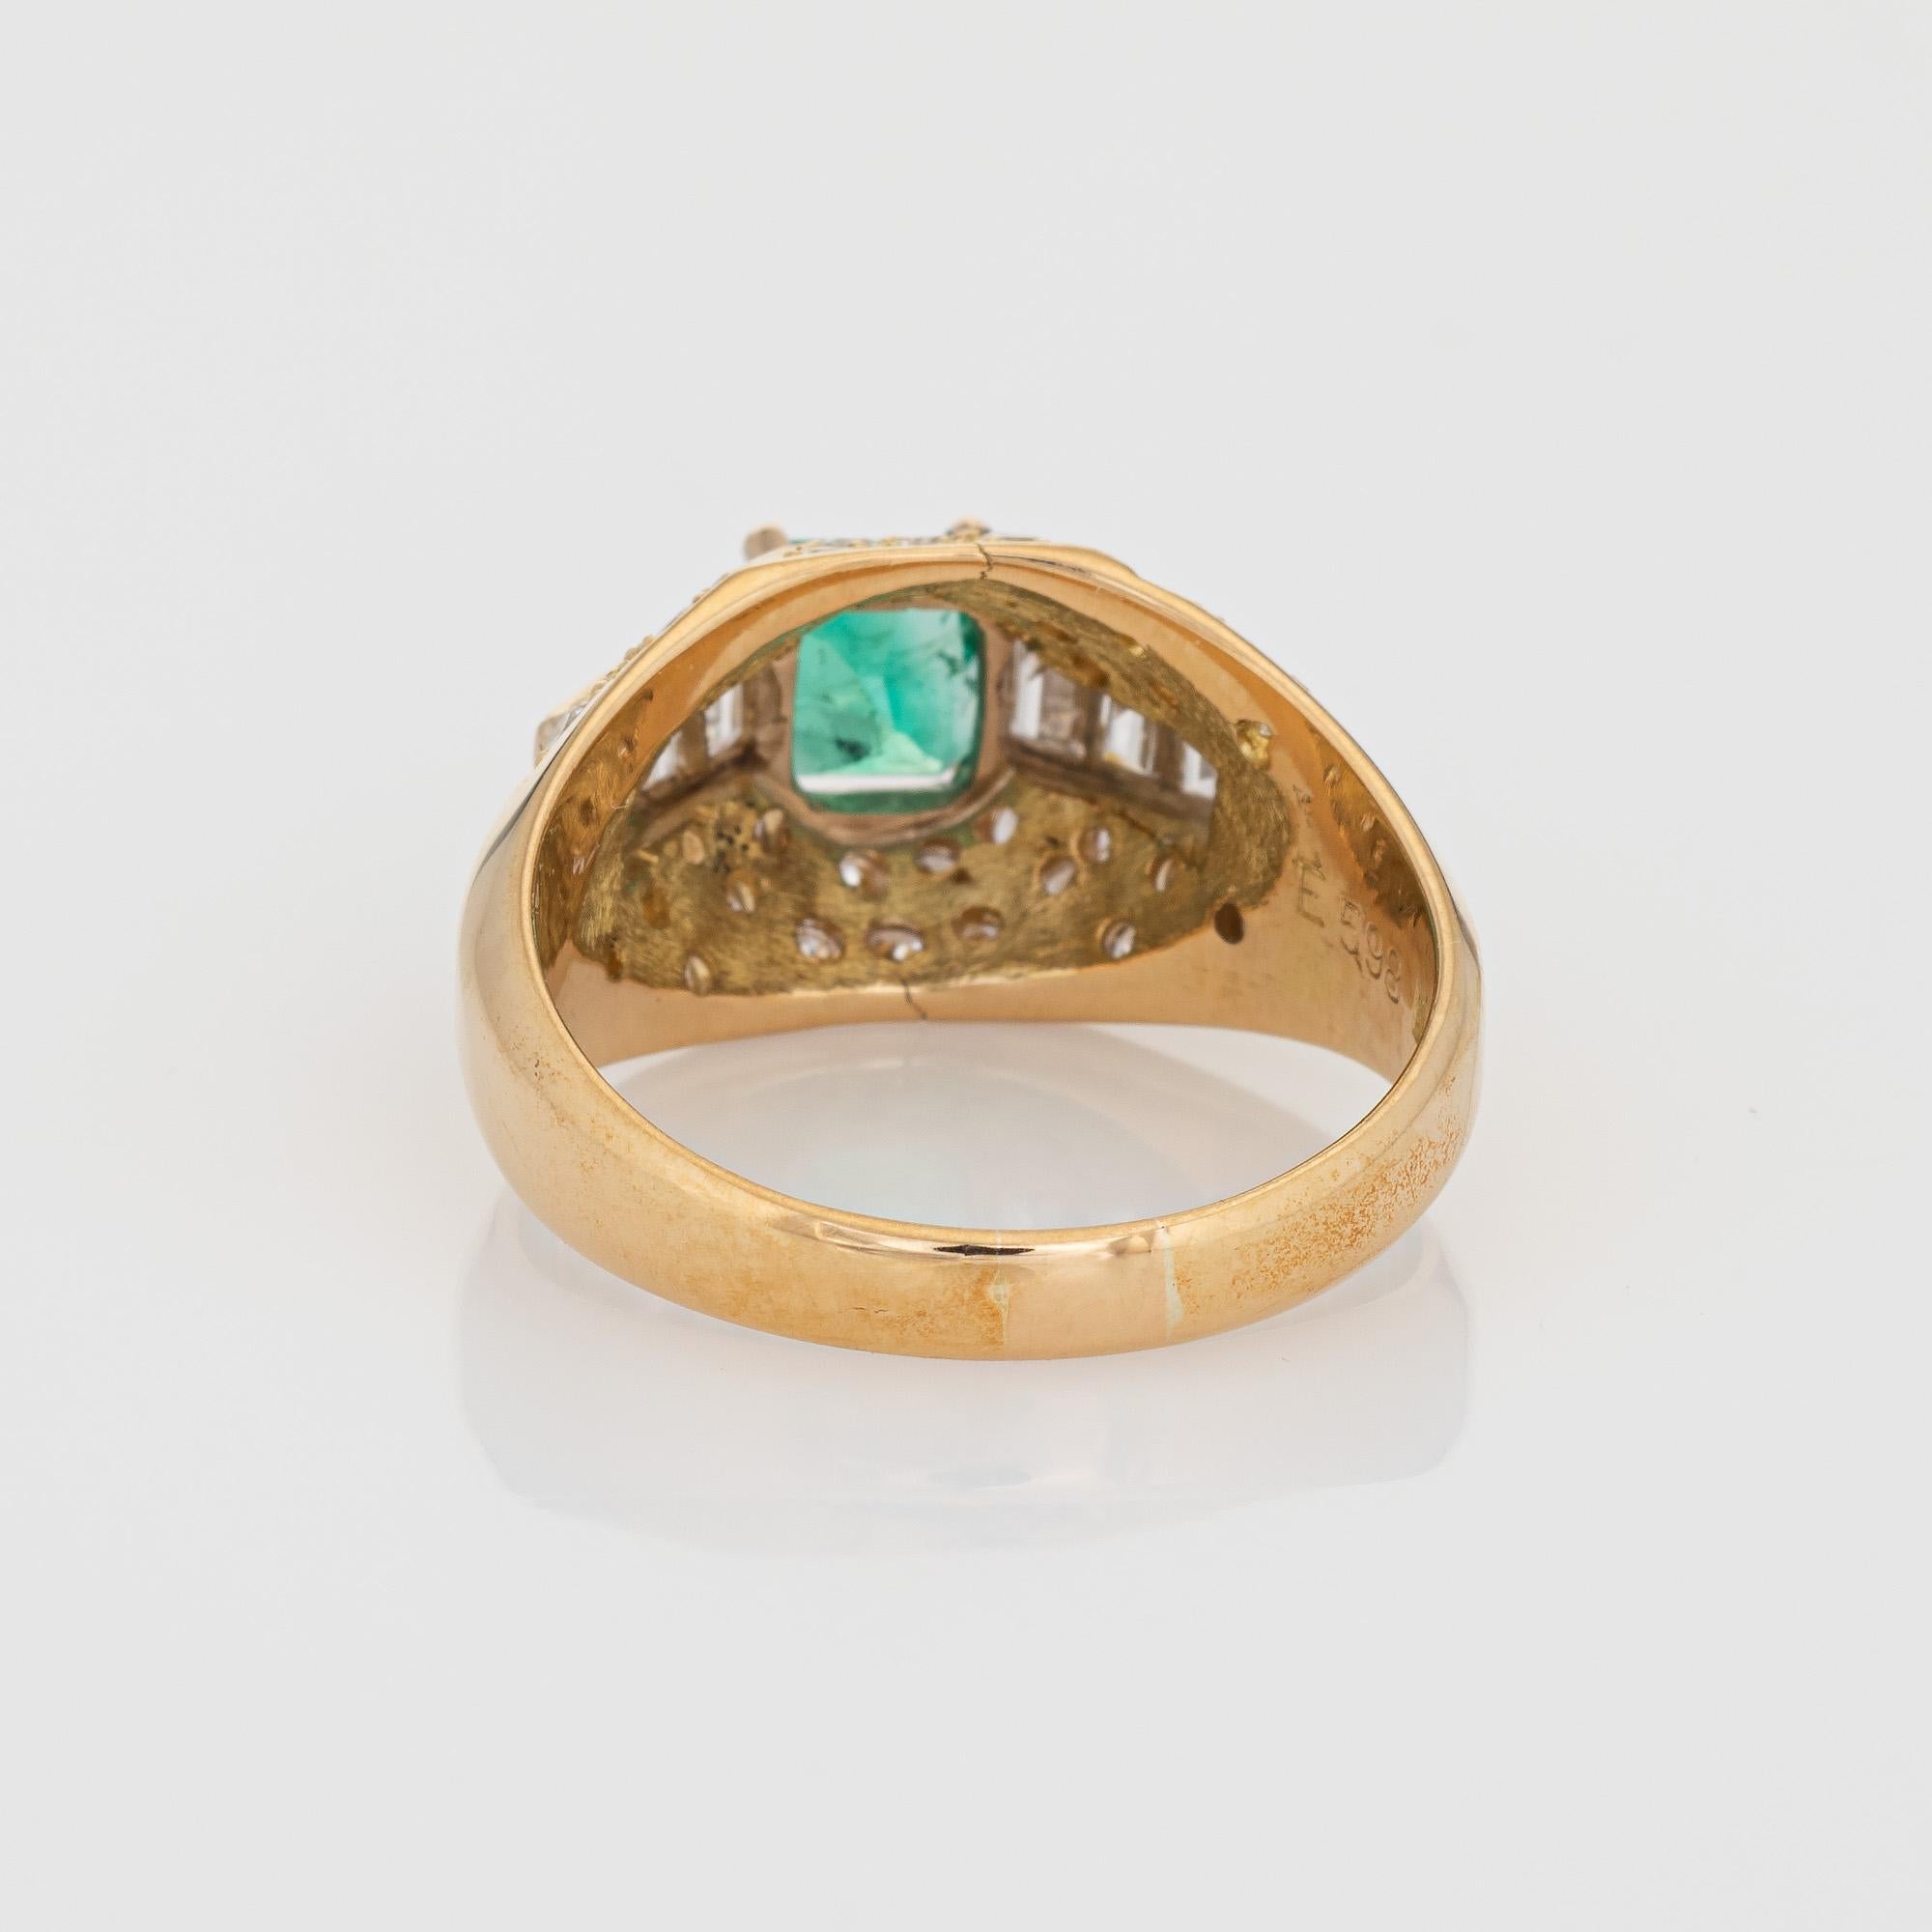 Emerald Diamond Ring Vintage 18k Yellow Gold Dome Gemstone Engagement In Good Condition For Sale In Torrance, CA